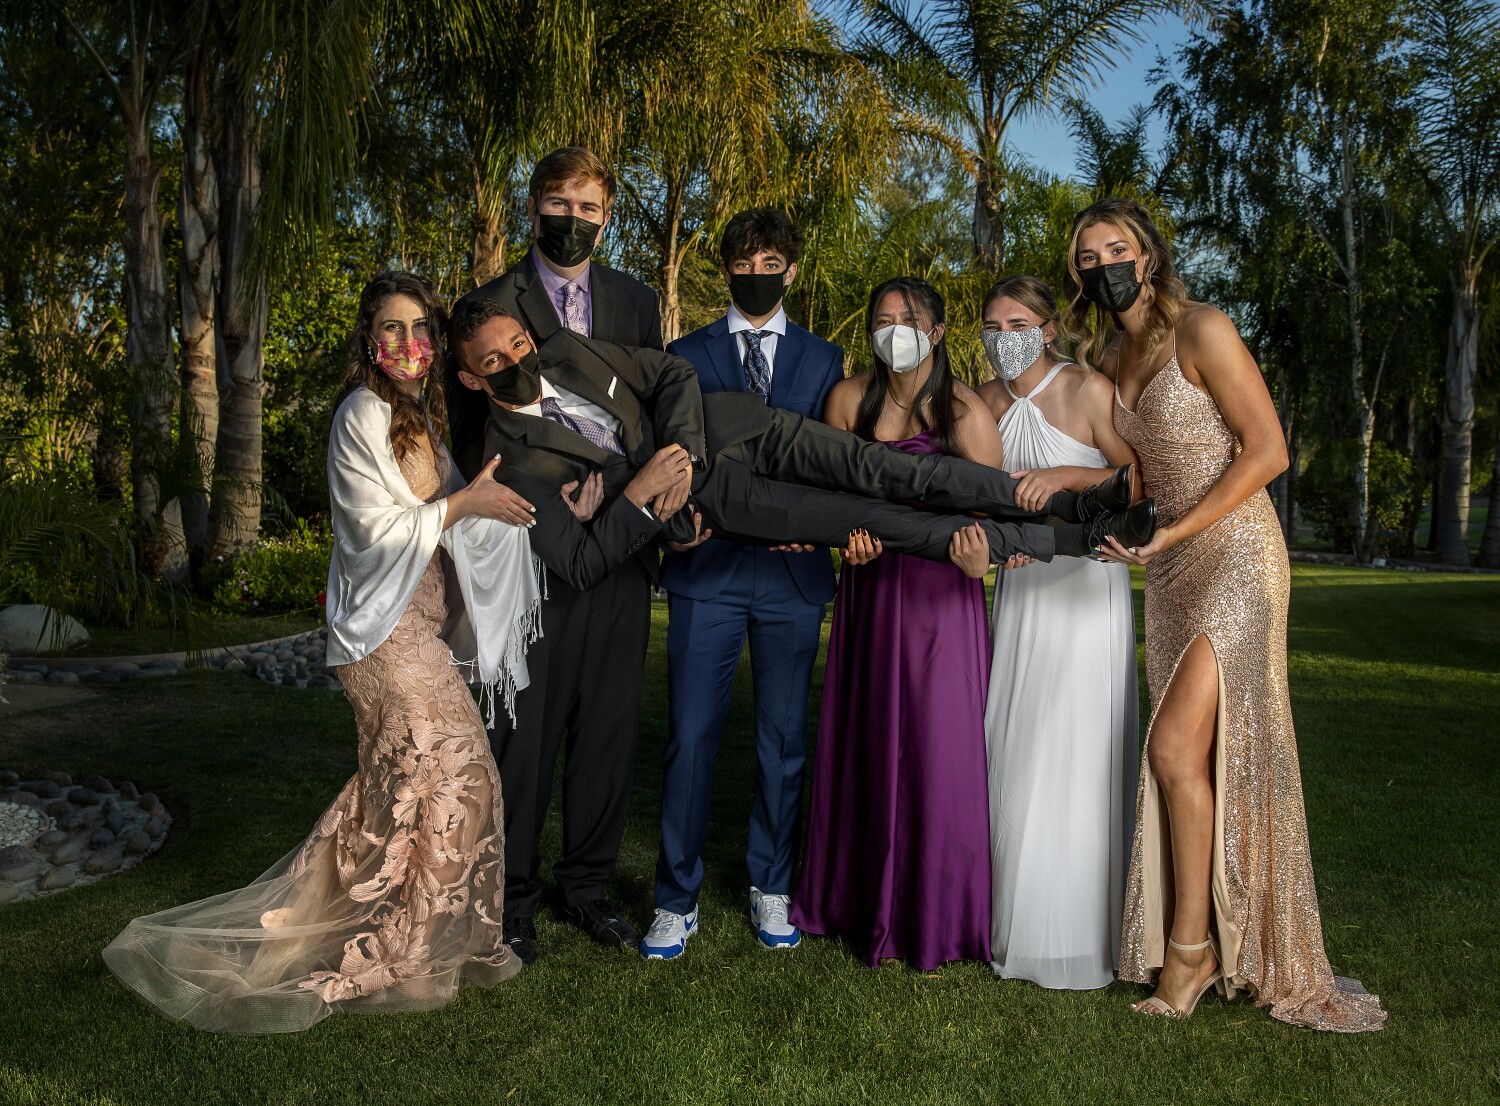 Picture perfect: Photo booth documents one high school's prom